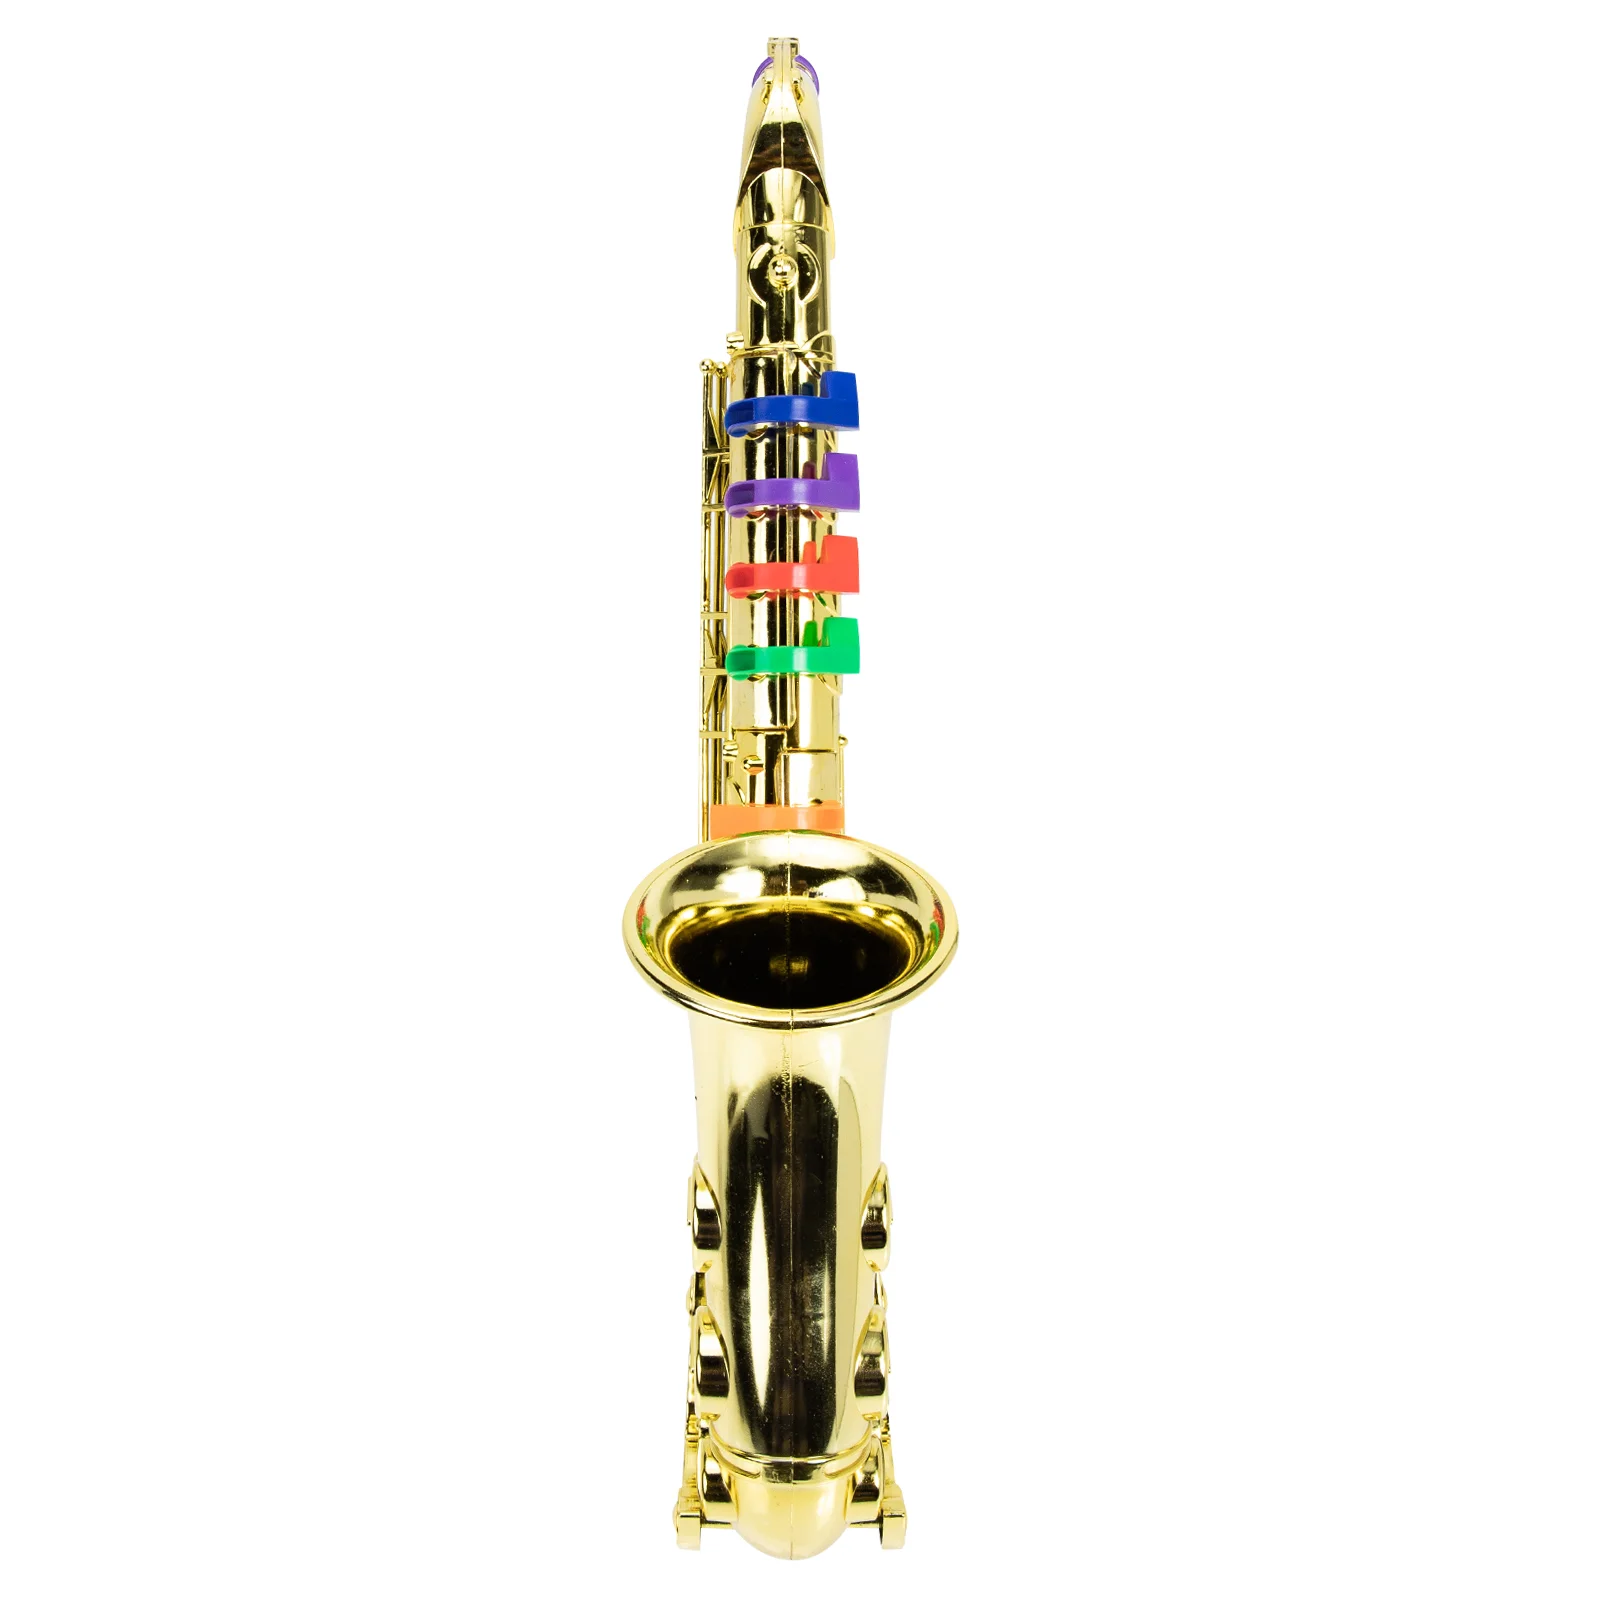 

Sax Toy Early Educational Toys Plastic Models Musical Instrument Kids Beginner Saxophone Gift Plaything Simulation